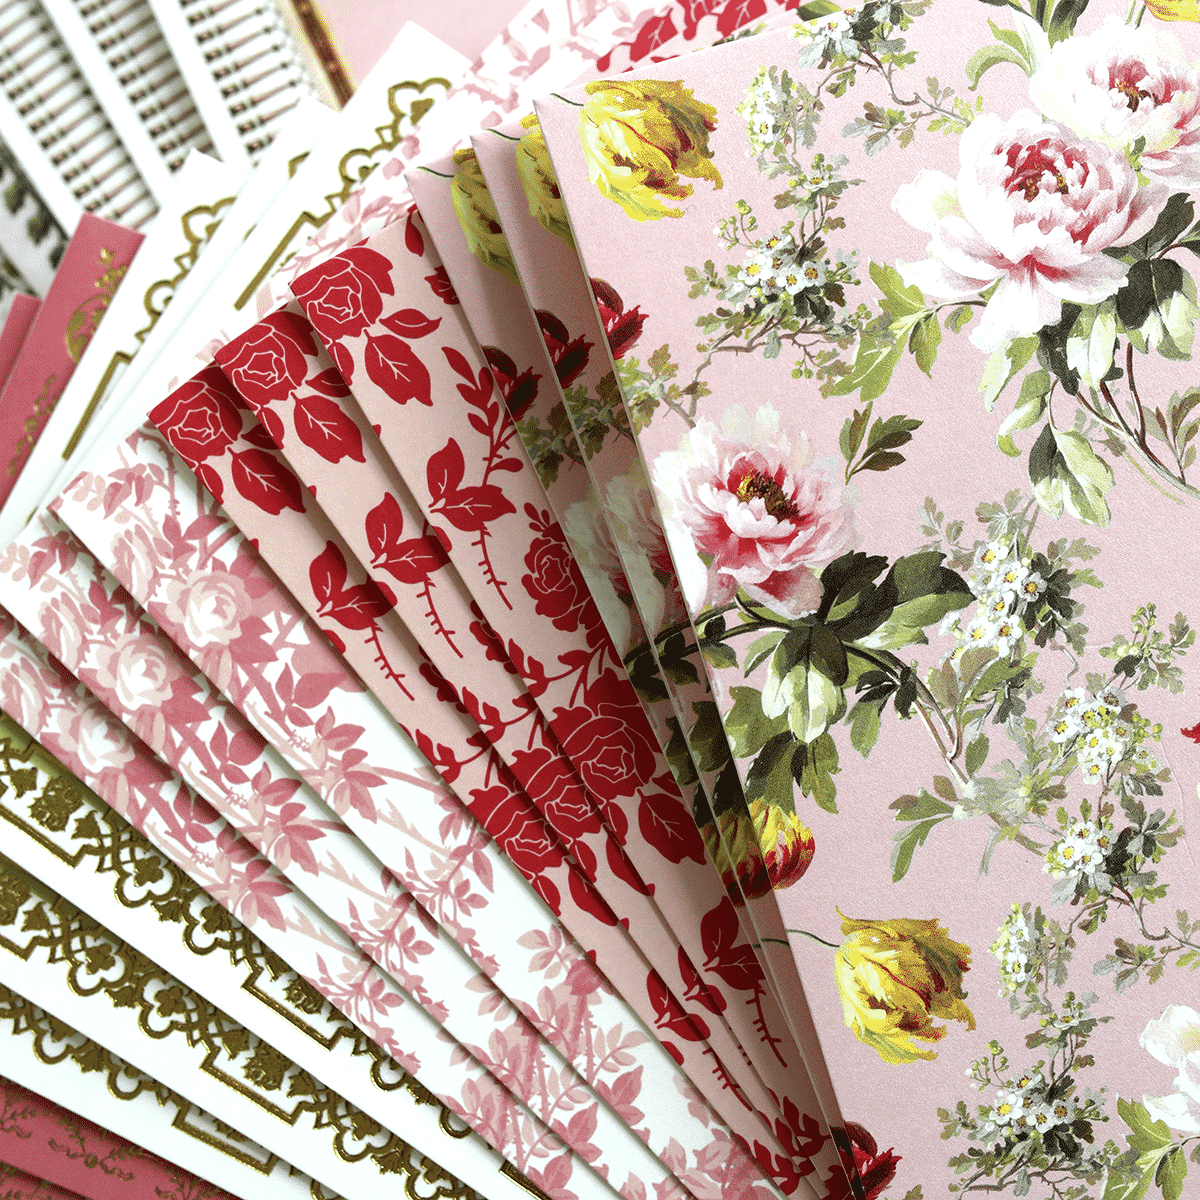 a close up of a bunch of papers with flowers on them.